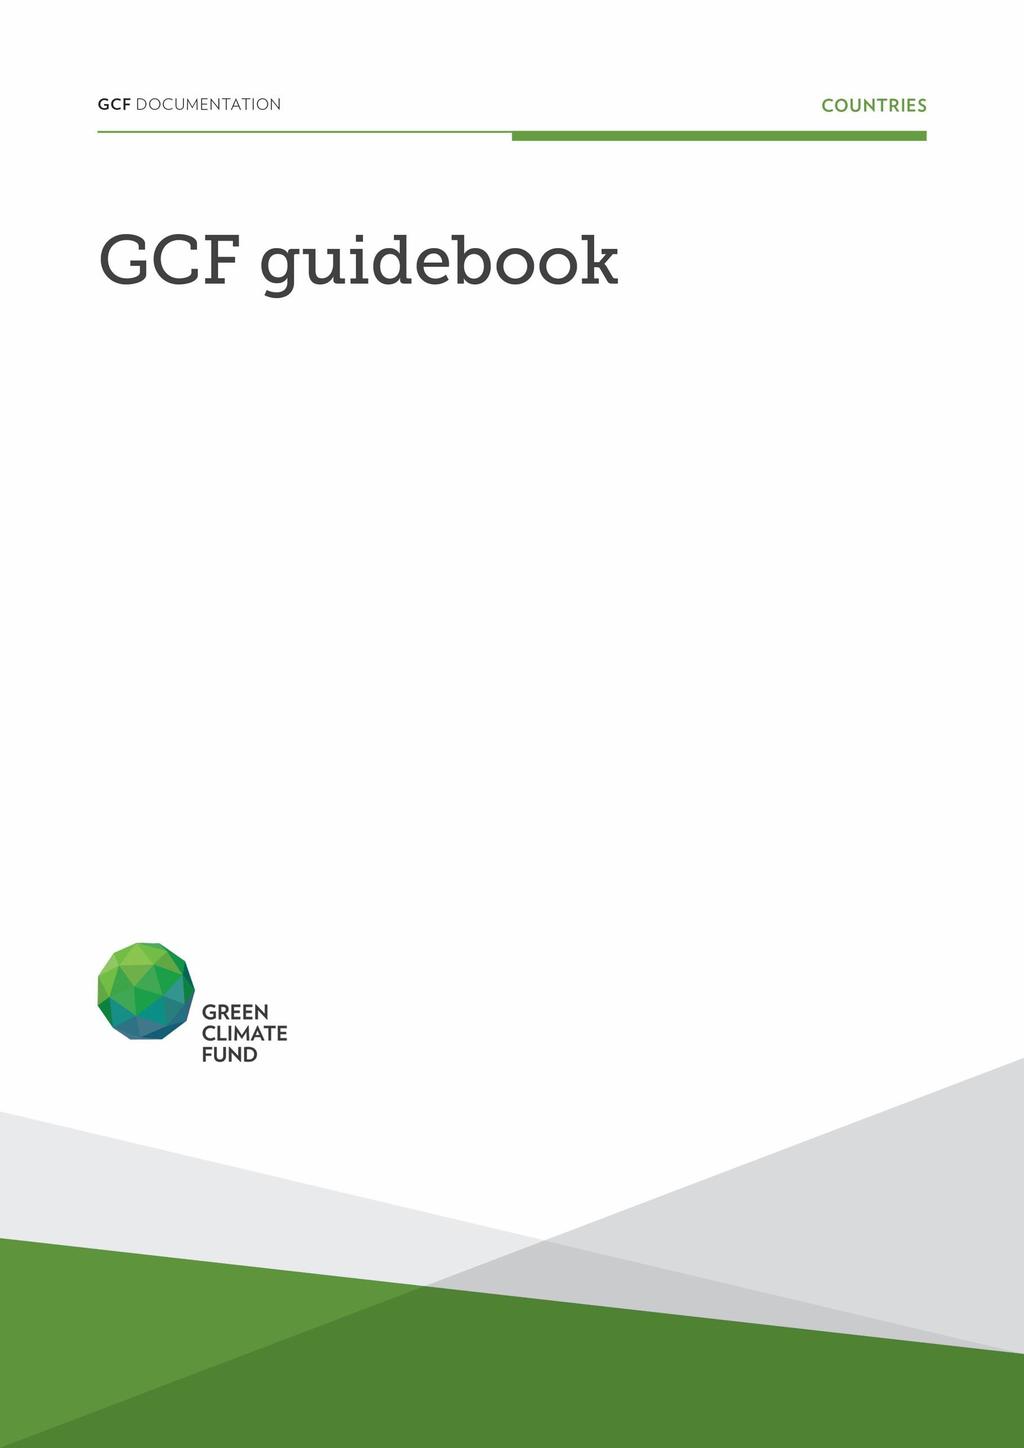 Accessing the GCF Readiness and Preparatory Support